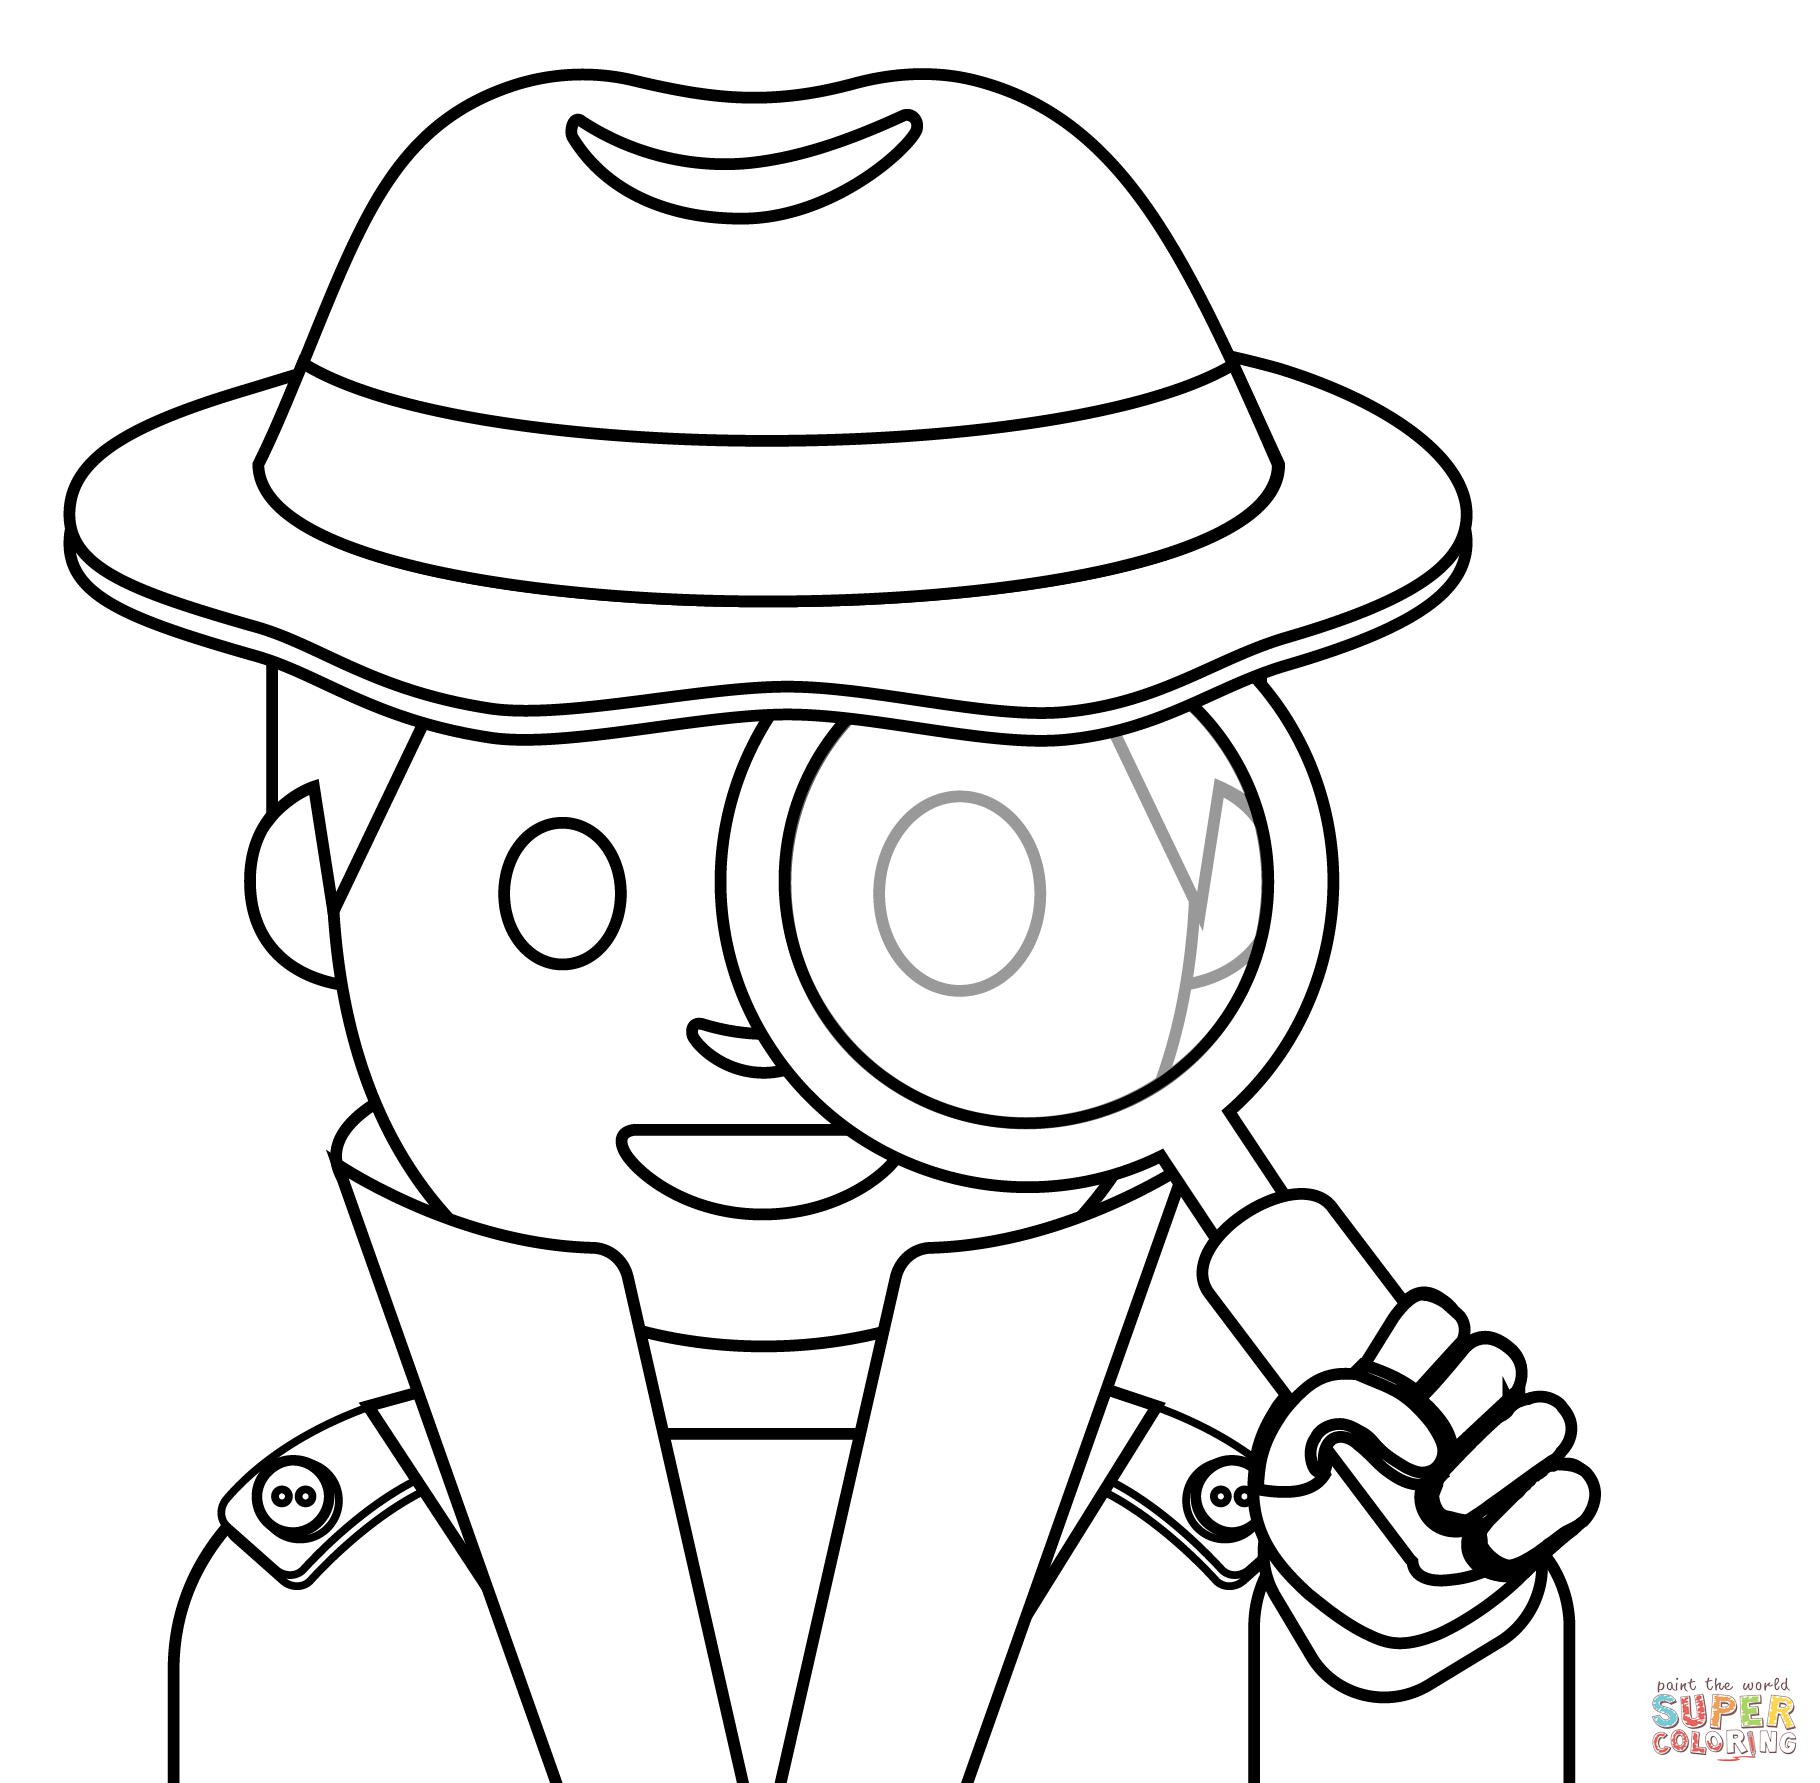 Detective Emoji coloring page | Free Printable Coloring Pages